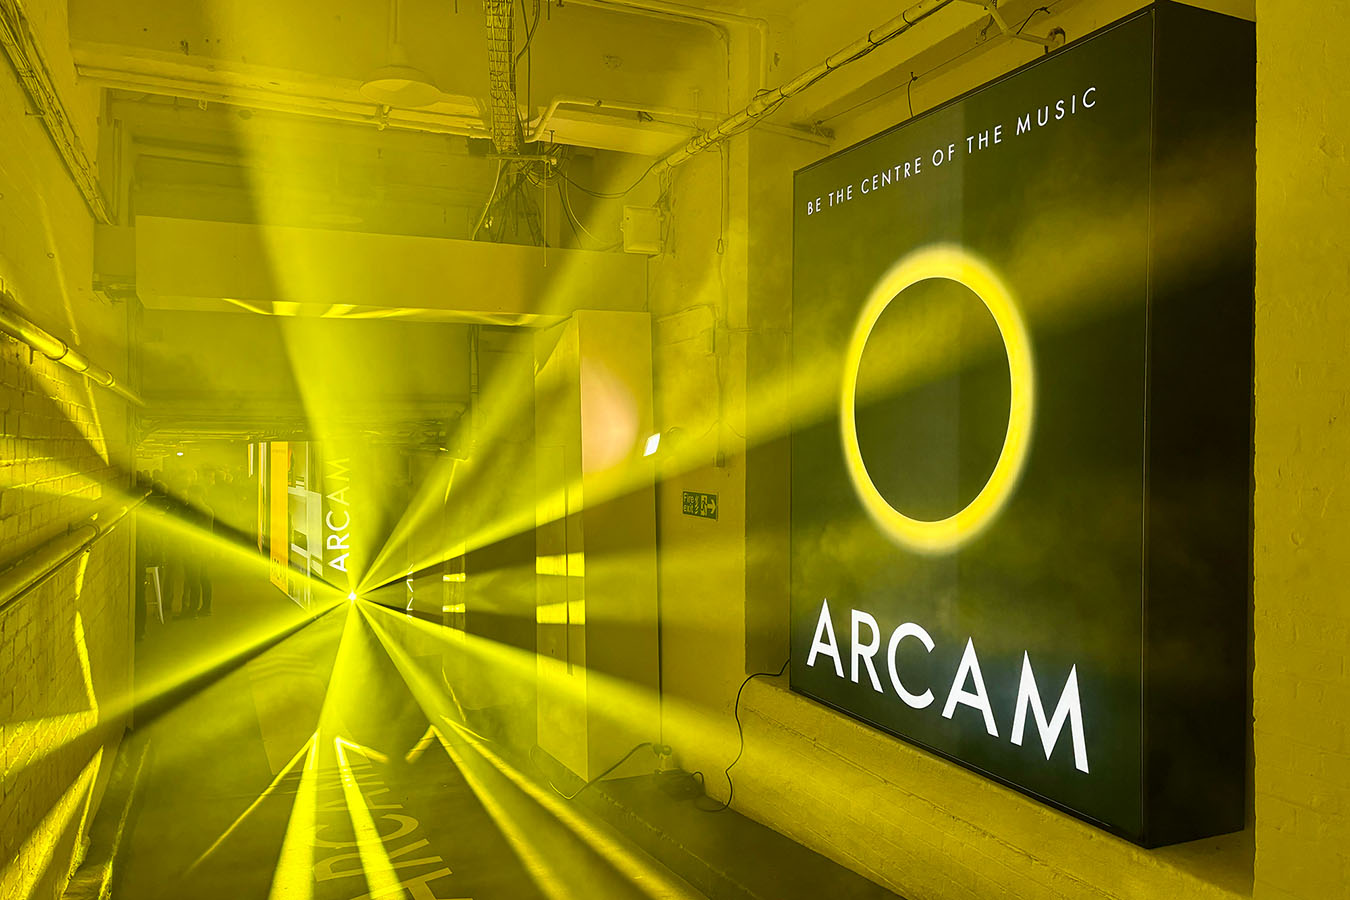 Entrance to the Vinyl Factory SoHo London during the Oct. 3 ARCAM Radia Series launch event.